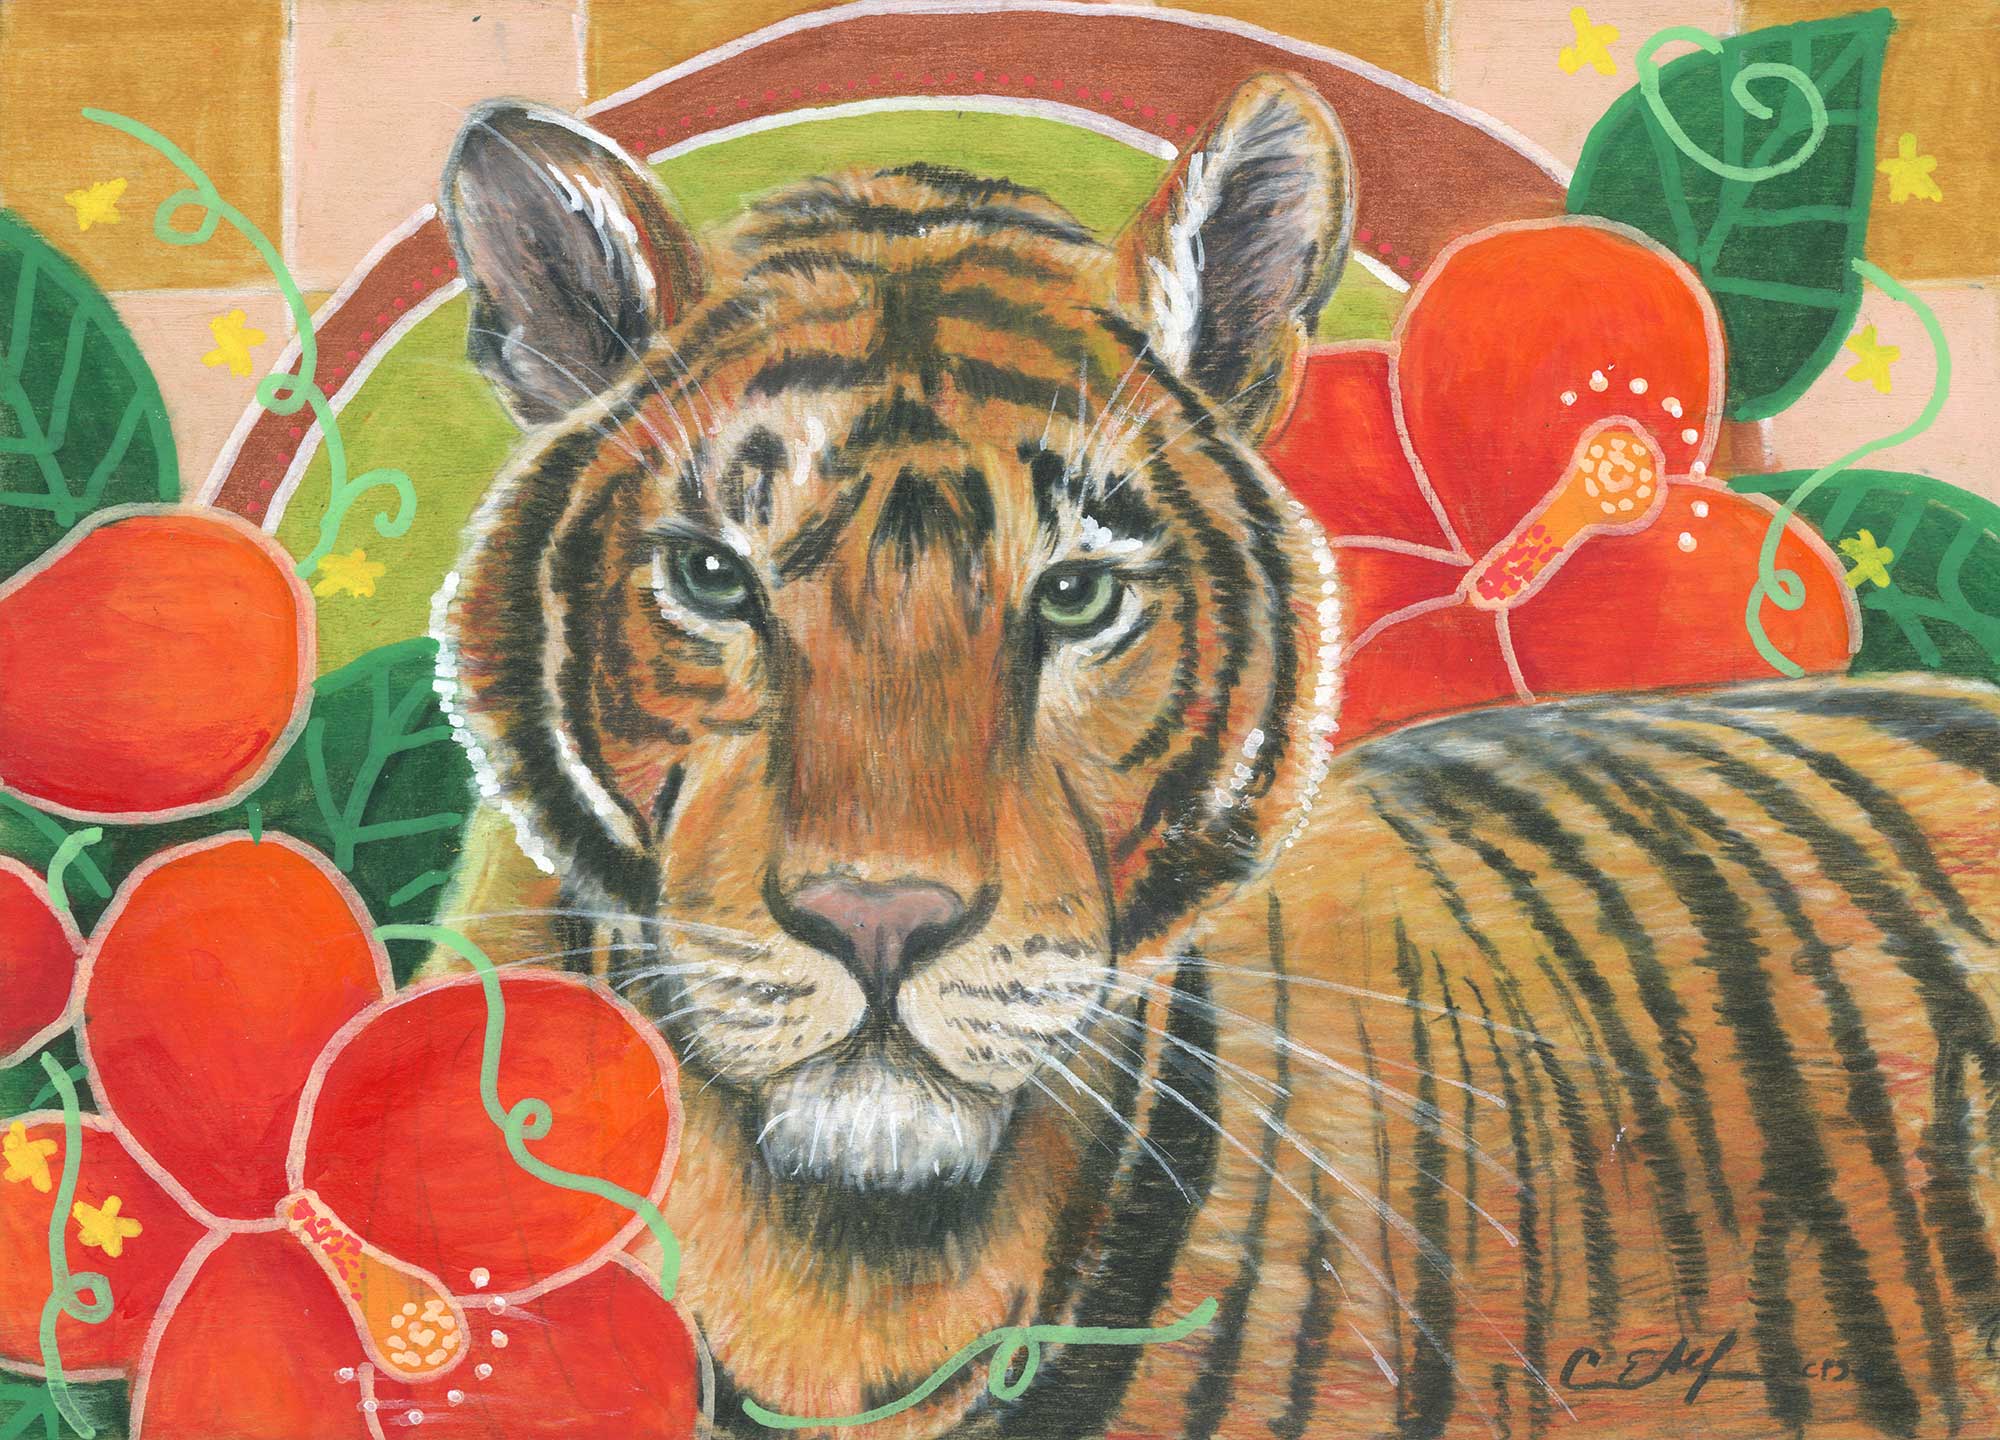 "Tiger in Hibiscus", 5" x 7", mixed media